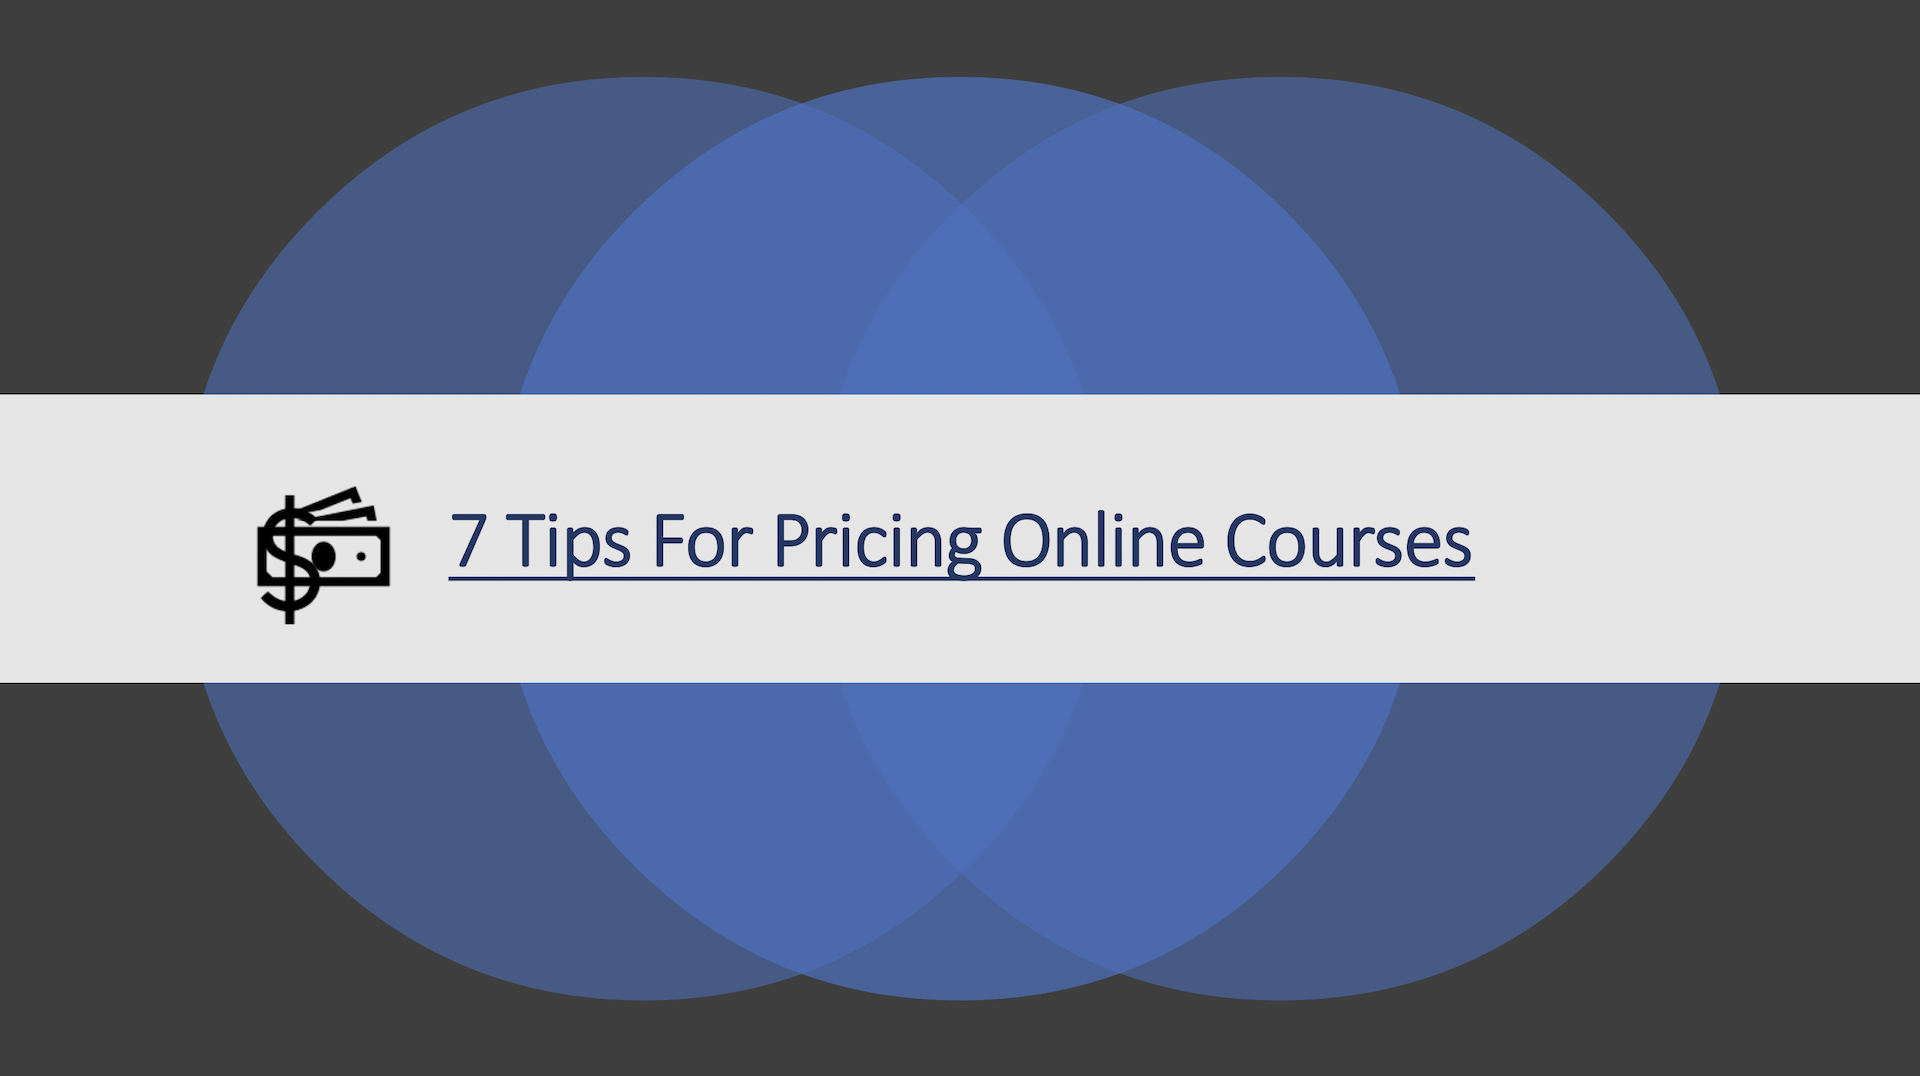 7 Tips For Pricing Online Courses